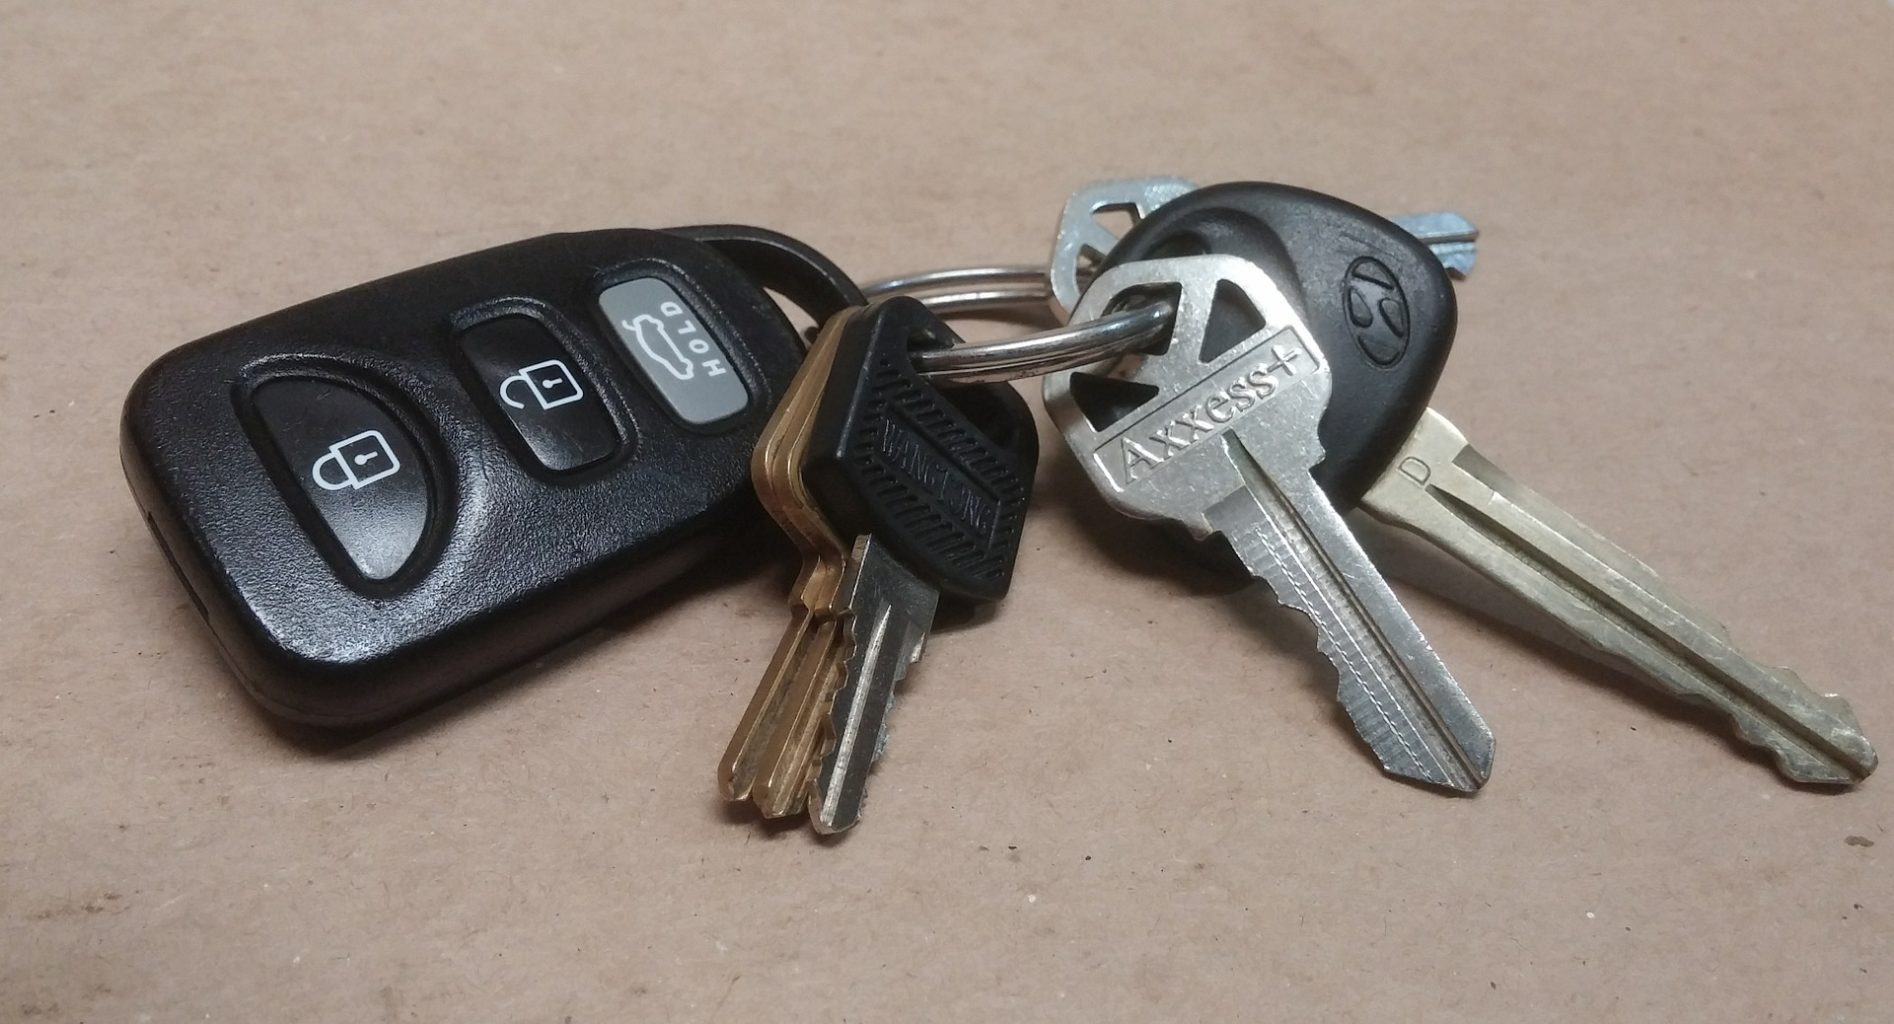 infiniti key fob not working after battery change